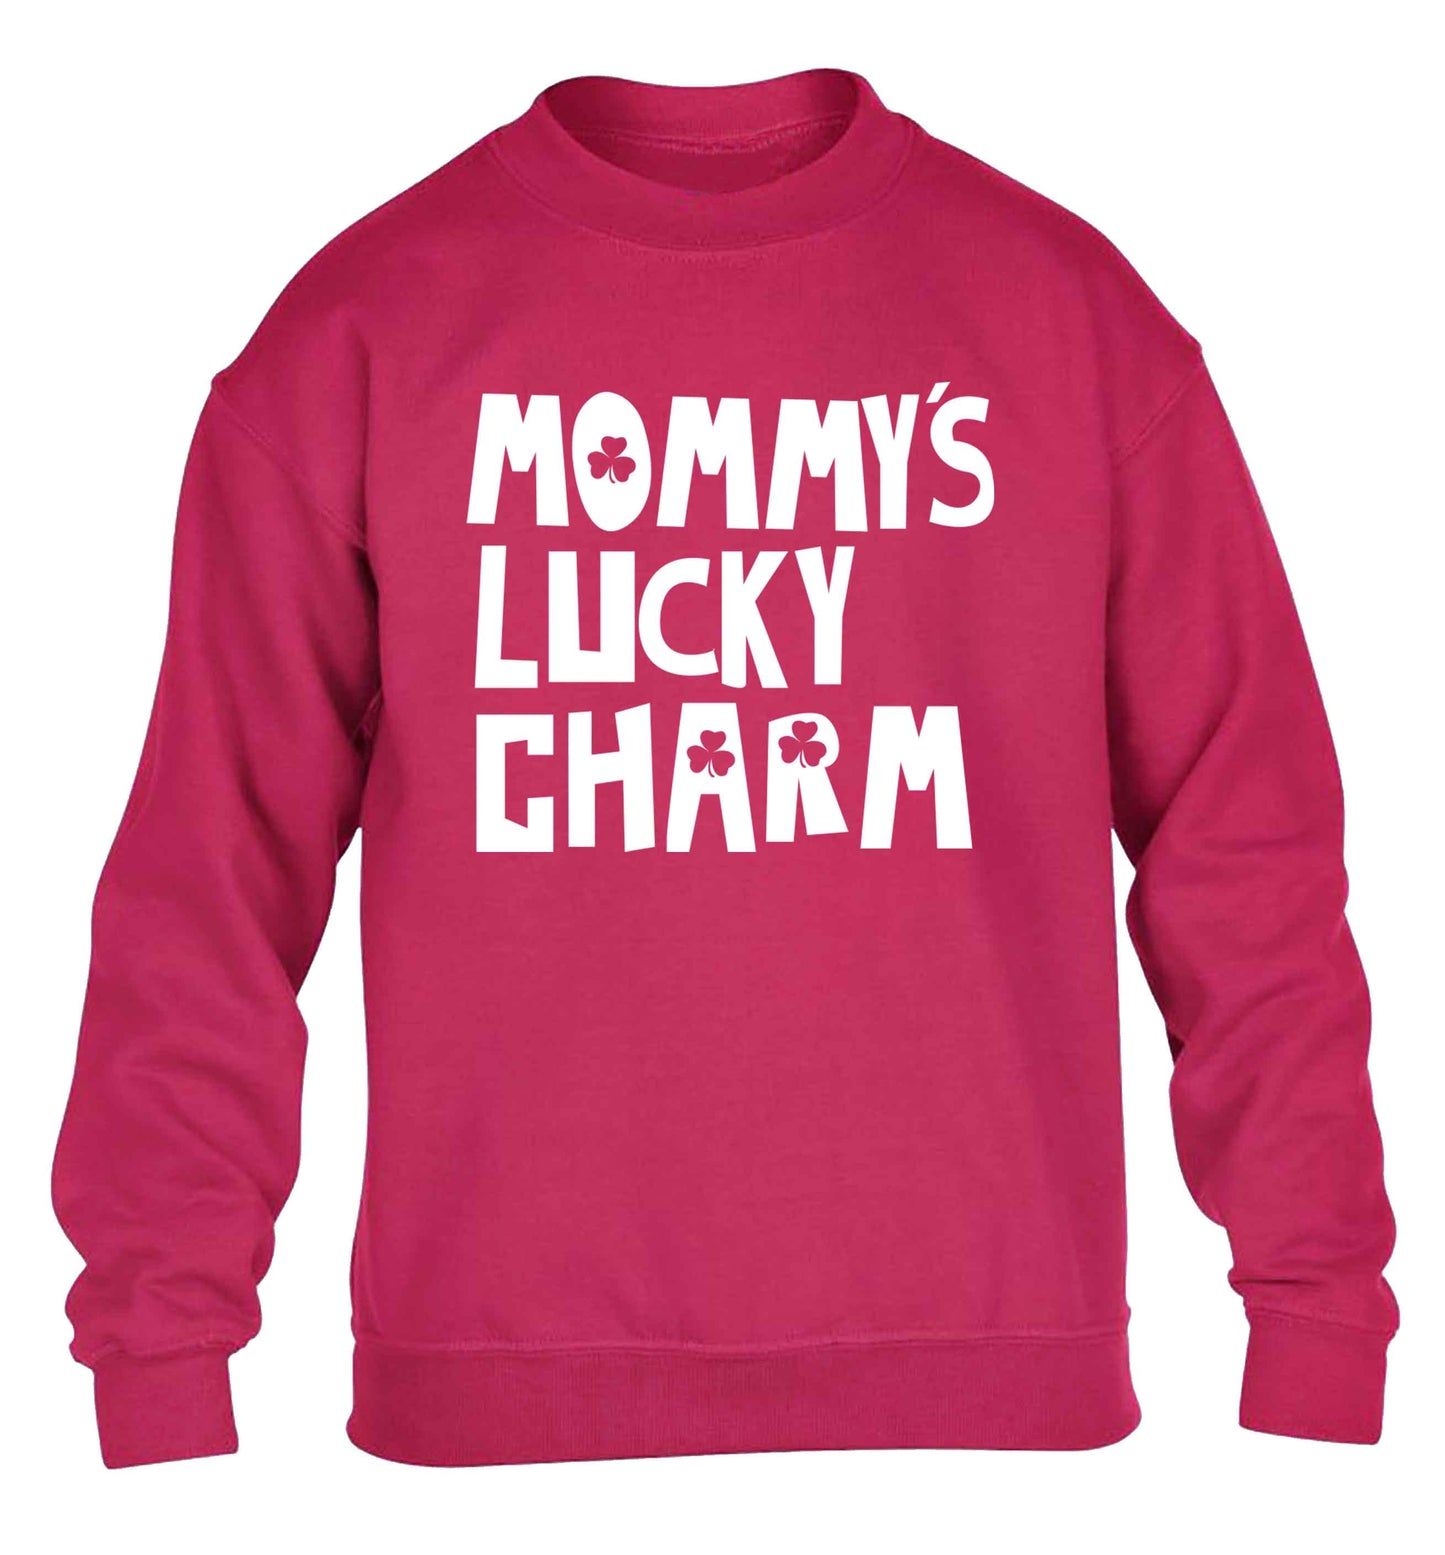 Mommy's lucky charm children's pink sweater 12-13 Years